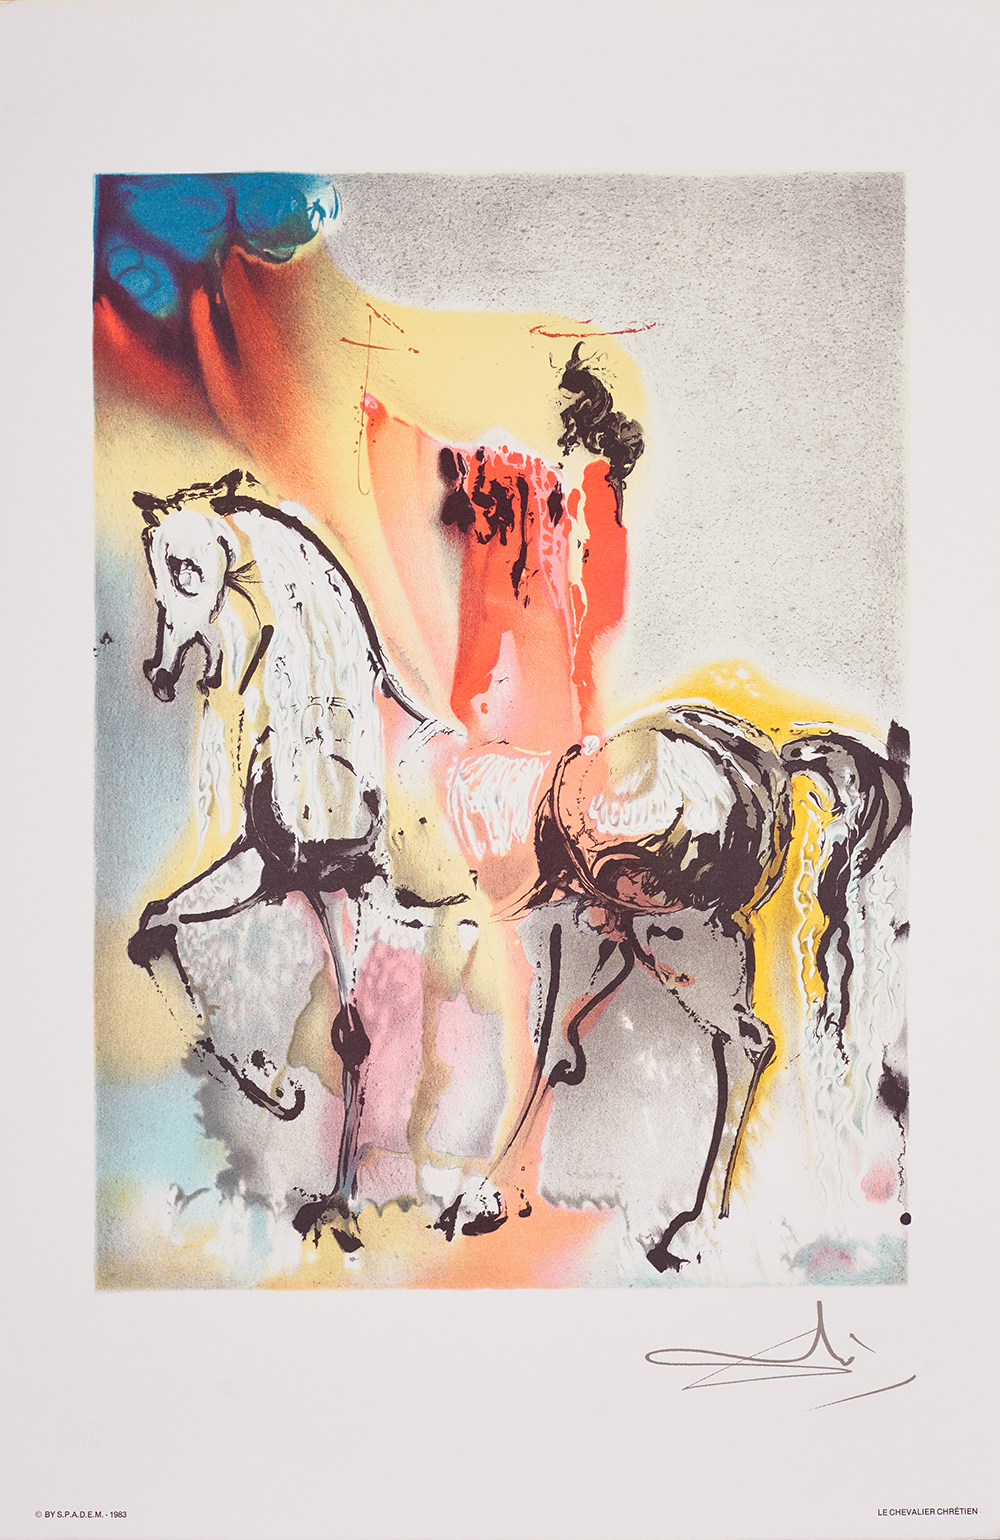 'Le Chevalier Chretien' from the series 'Dalinean Horses'